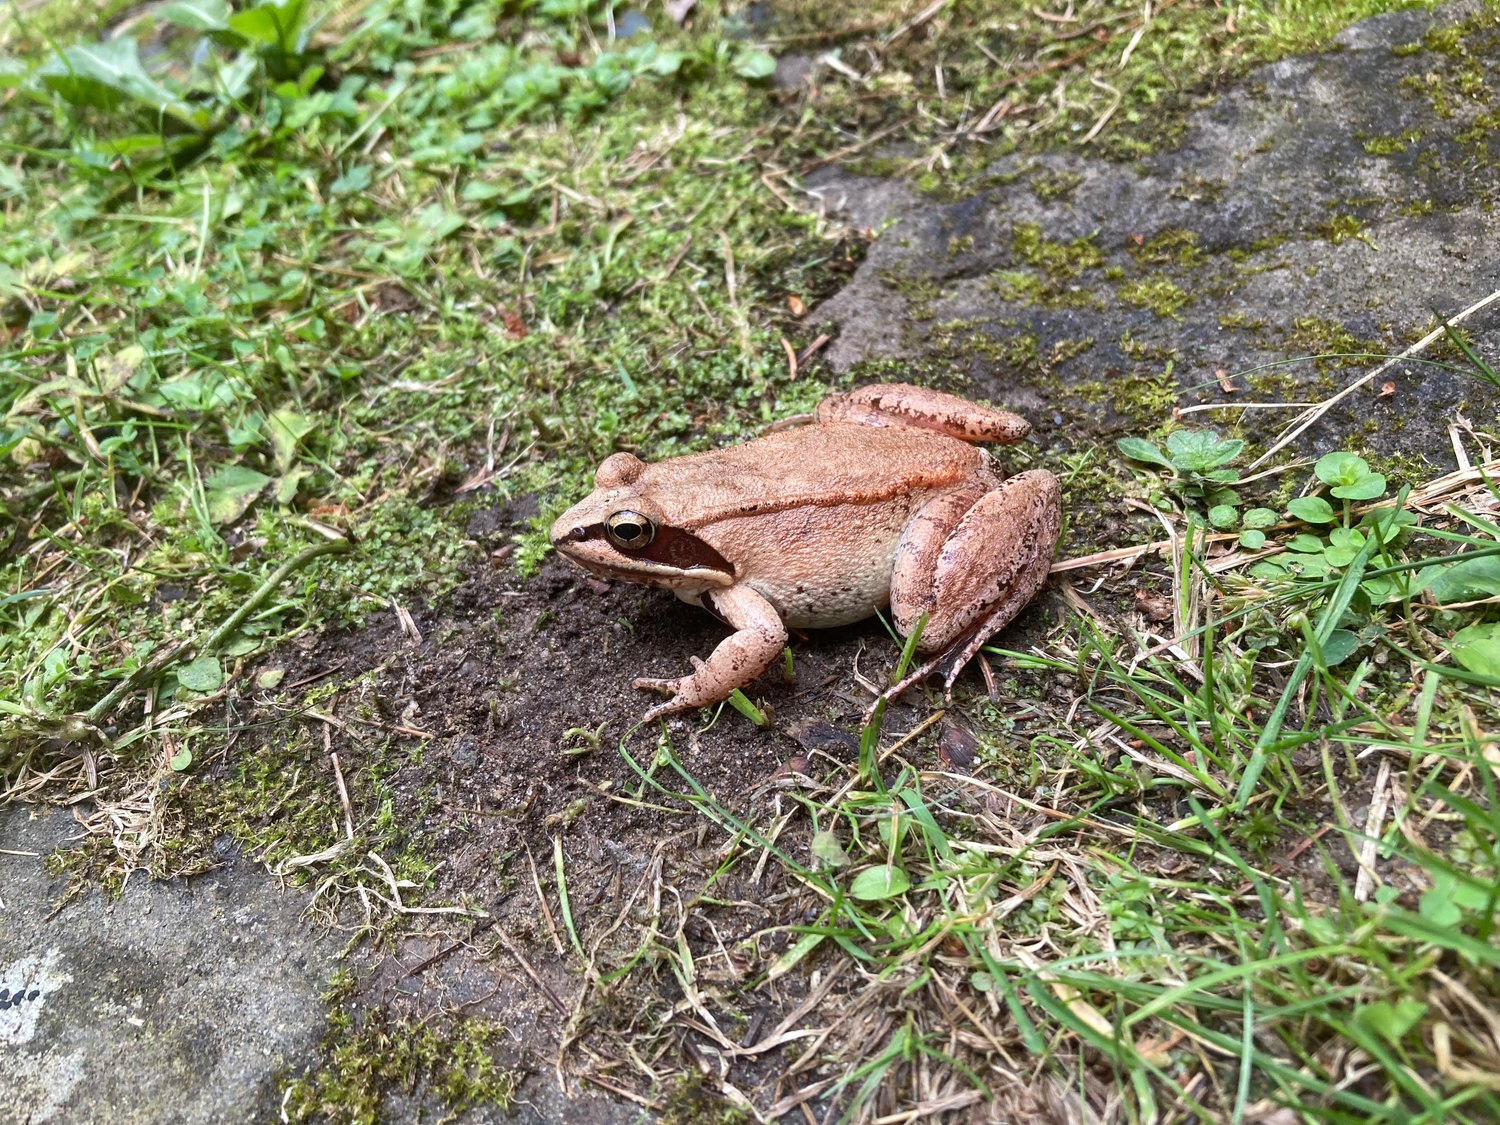 Wood frogs are the first frogs to emerge from hibernation in the Upper Delaware River region. They range up to three inches in length, with pinkish-brown skin and a characteristic dark “robber’s mask” extending from the eye to the eardrum.